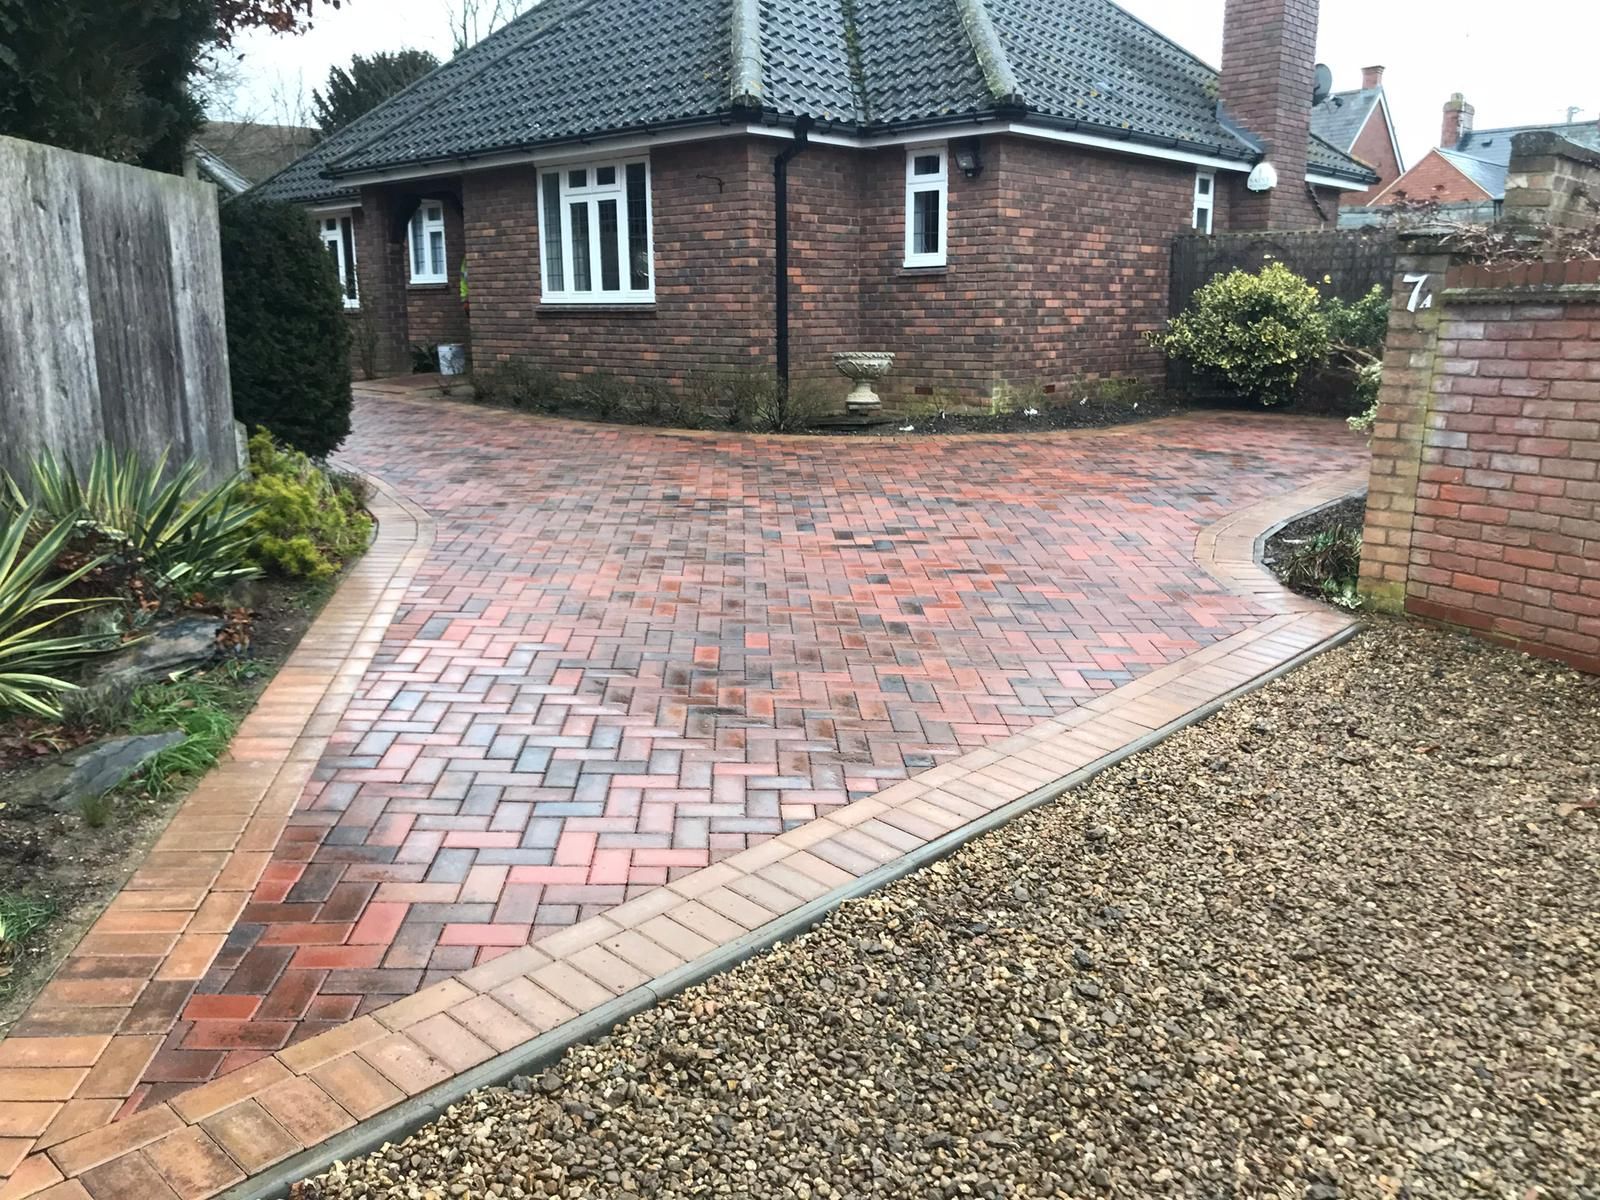 Northampton block paving driveway specialists Quality Paving install quality driveways and patios in Northampton and surrounding areas